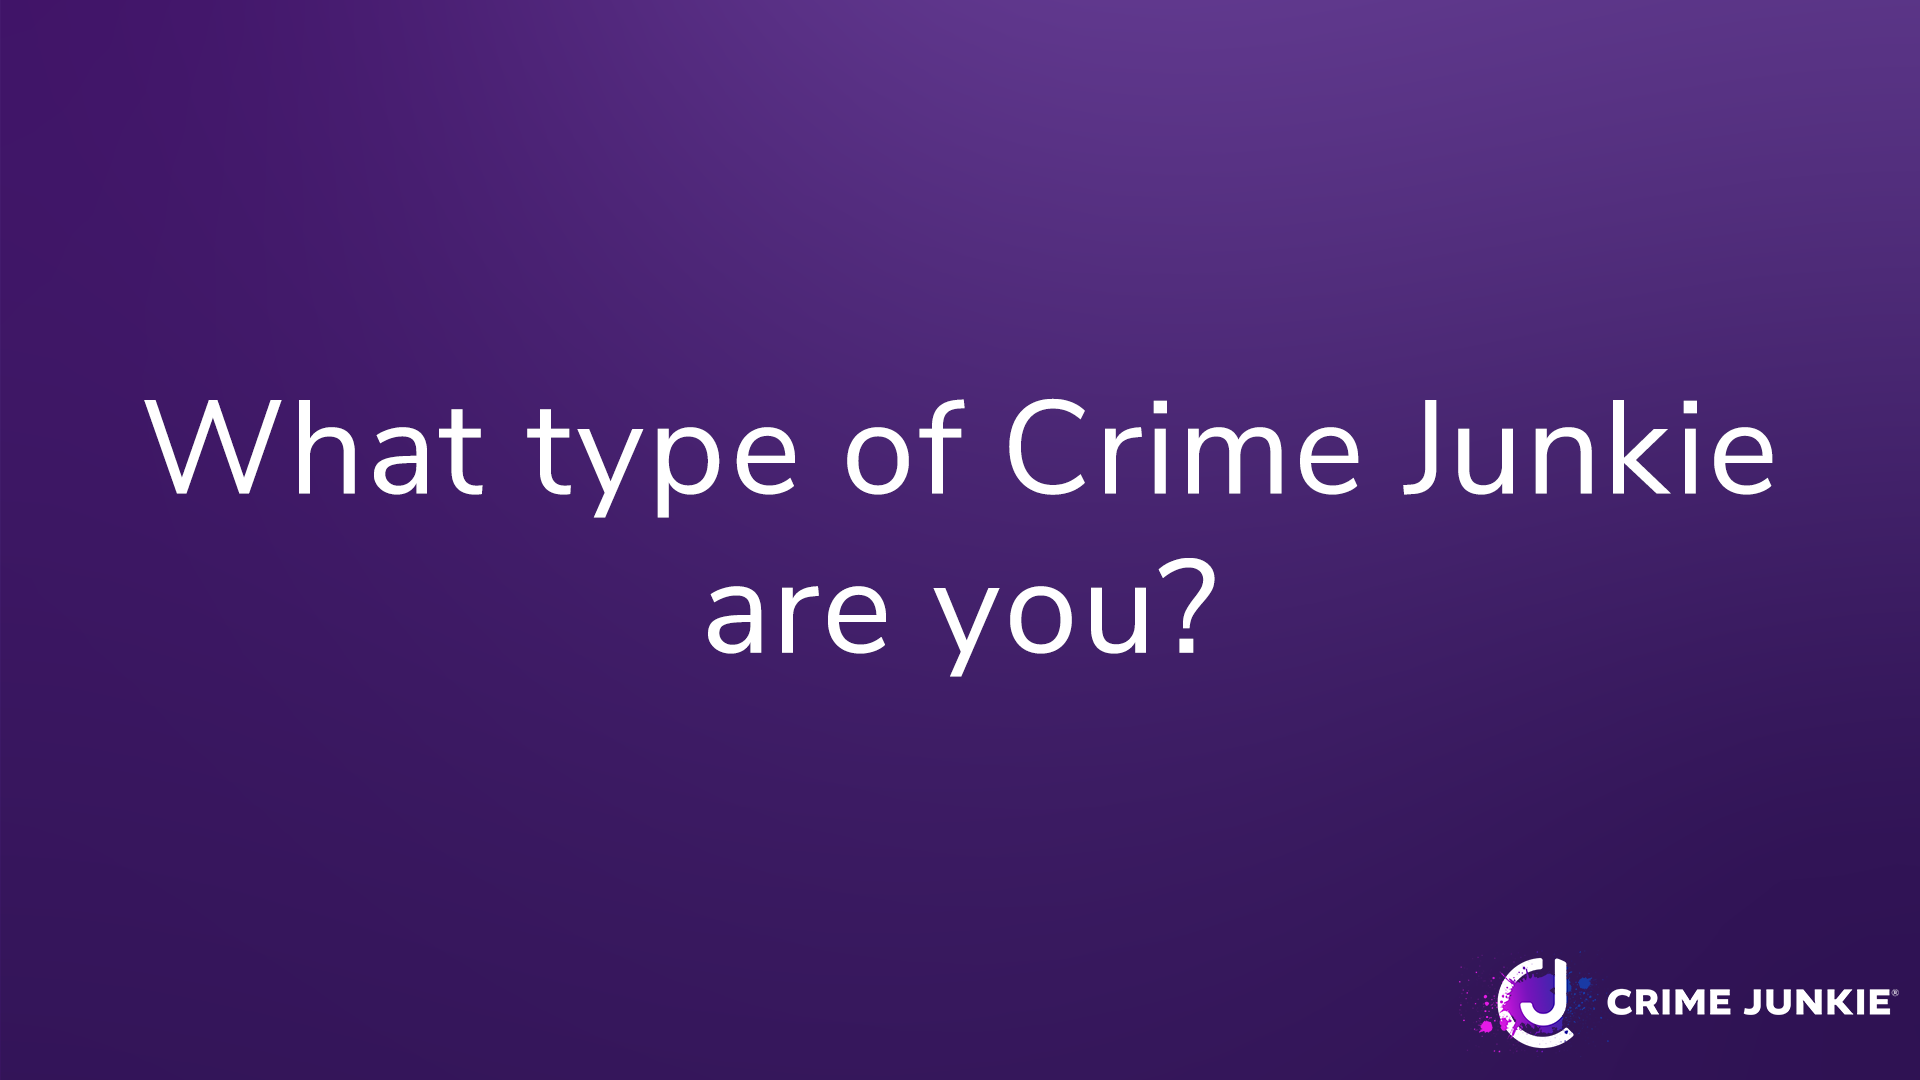 What type of Crime Junkie are you?